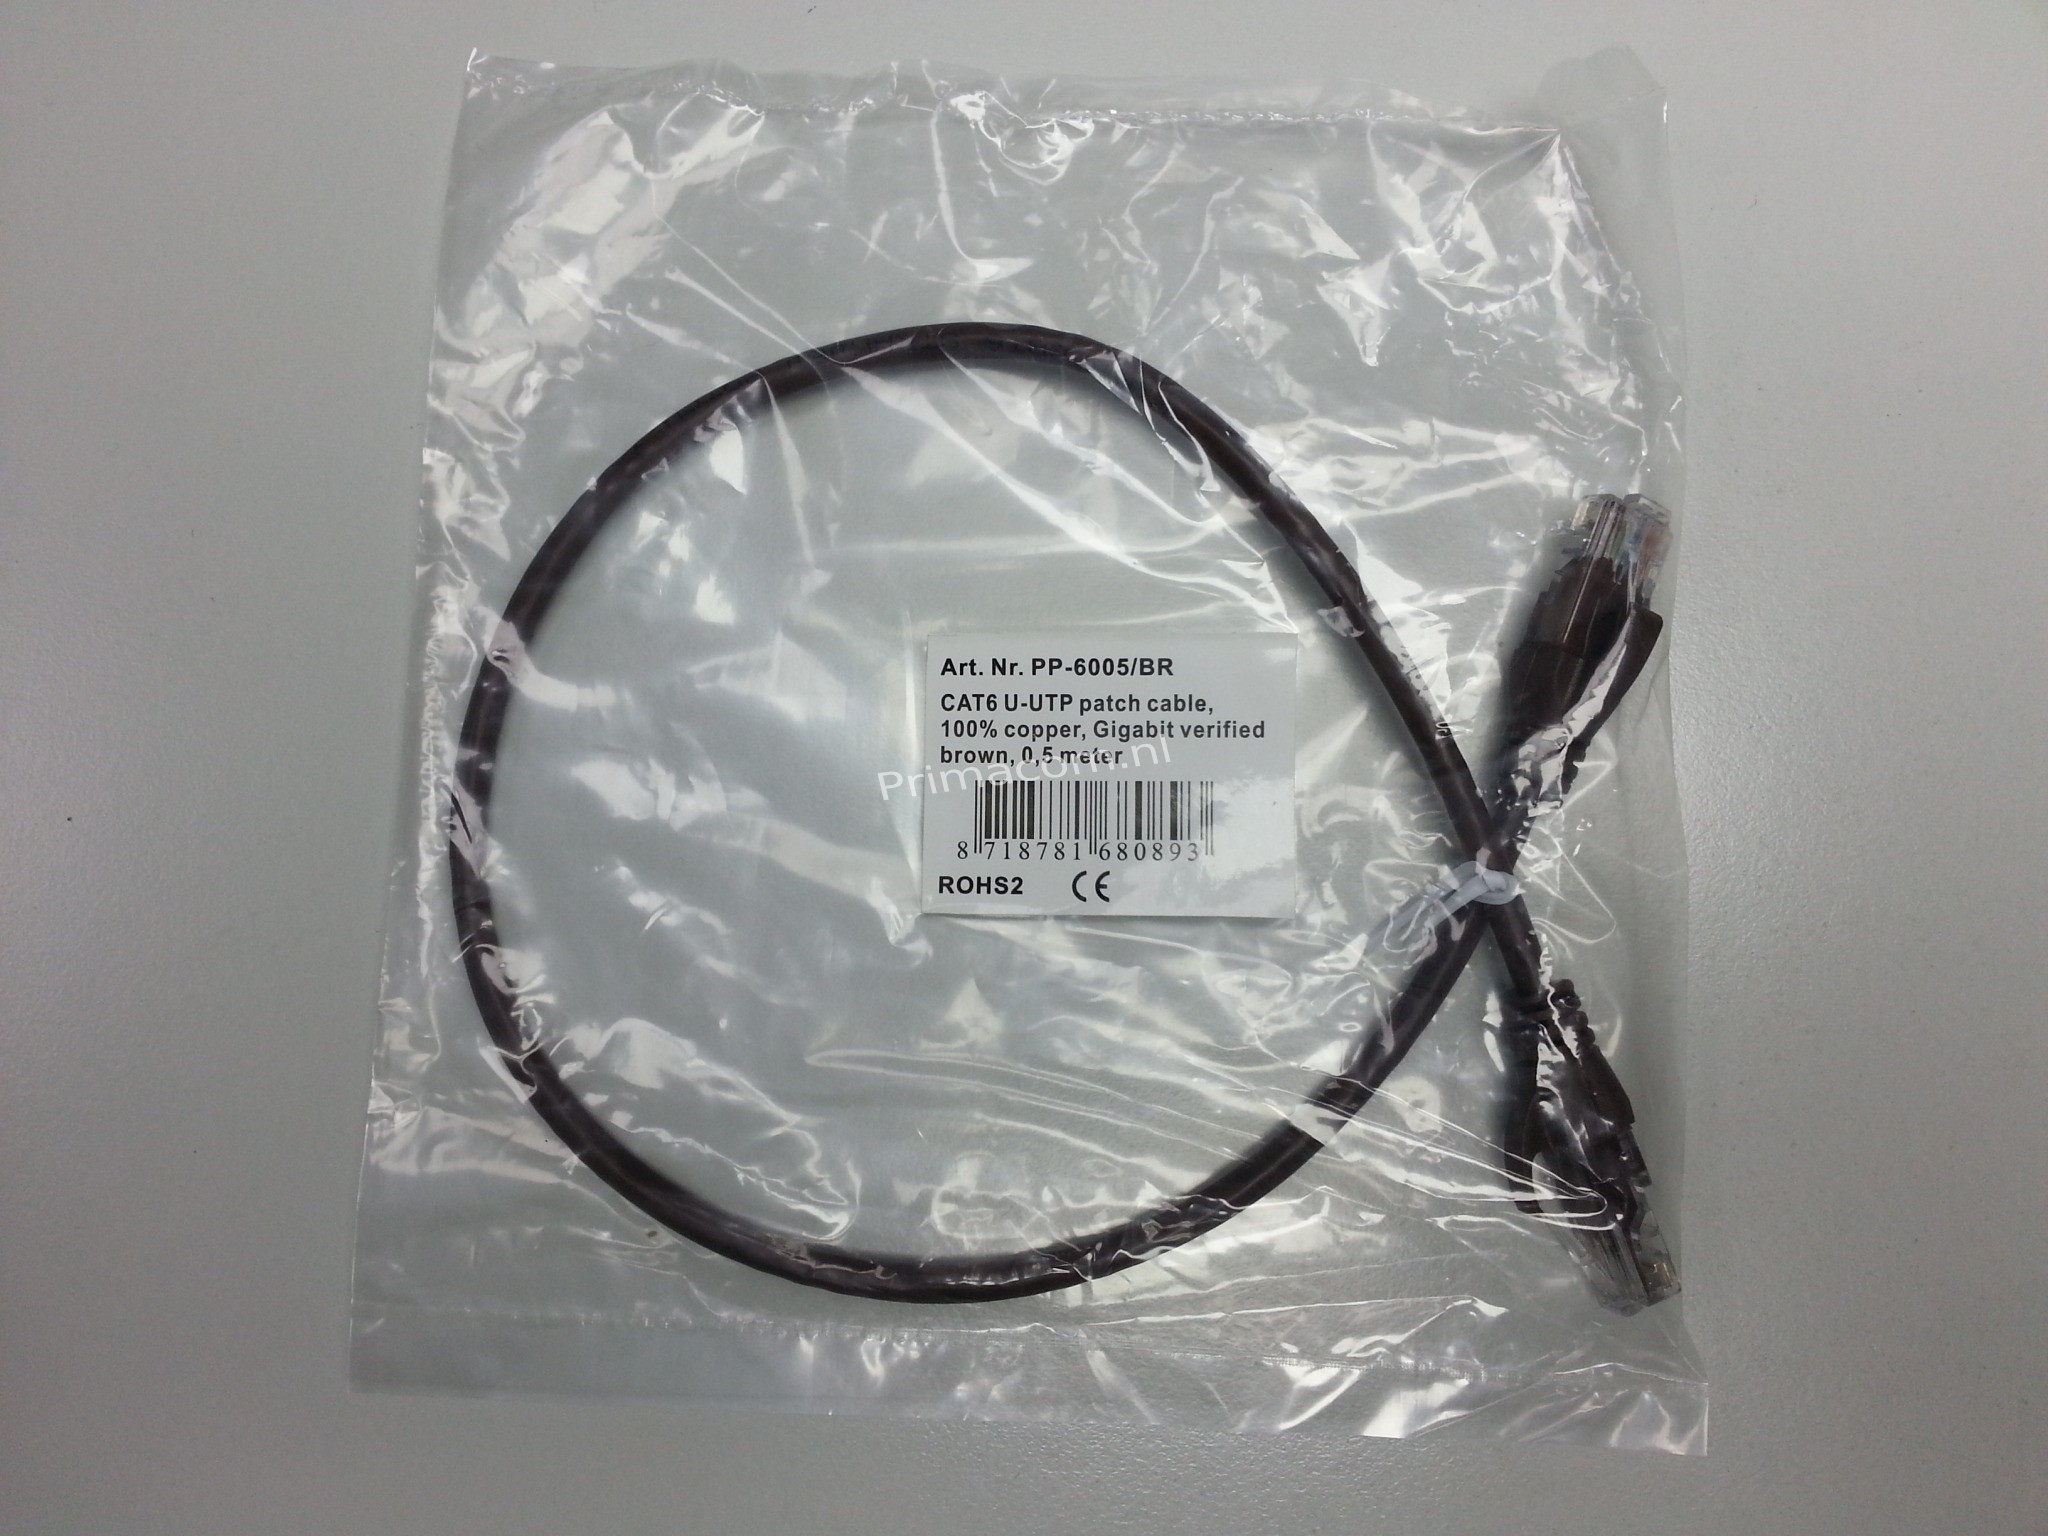 PP-6200/BR CAT6 UTP 20 M Brown Patch Cable PVC, AWG 26/7